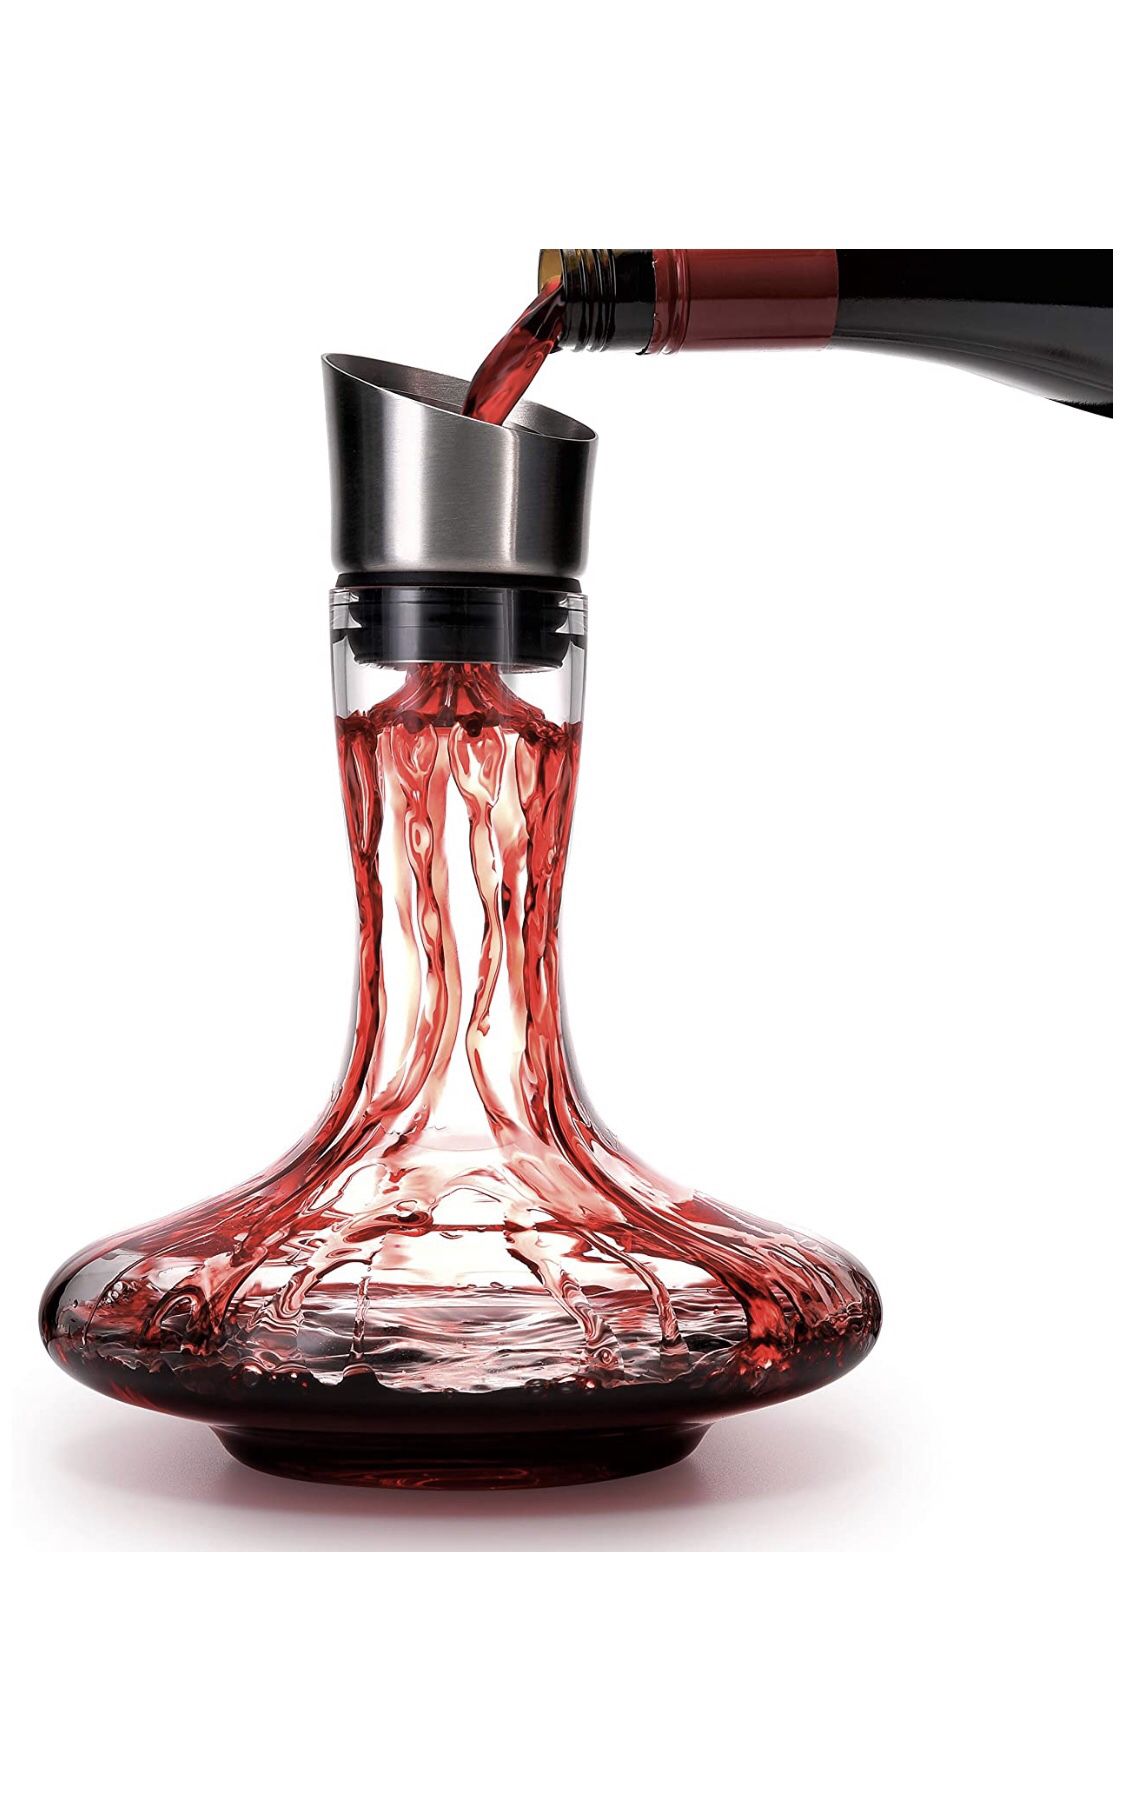 Wine Decanter Built-in Aerator Pourer, Wine Carafe Red Wine Decanter,100% Lead-free Crystal Glass, Wine Hand-held Aerator, Wine Gift, Wine Accessories